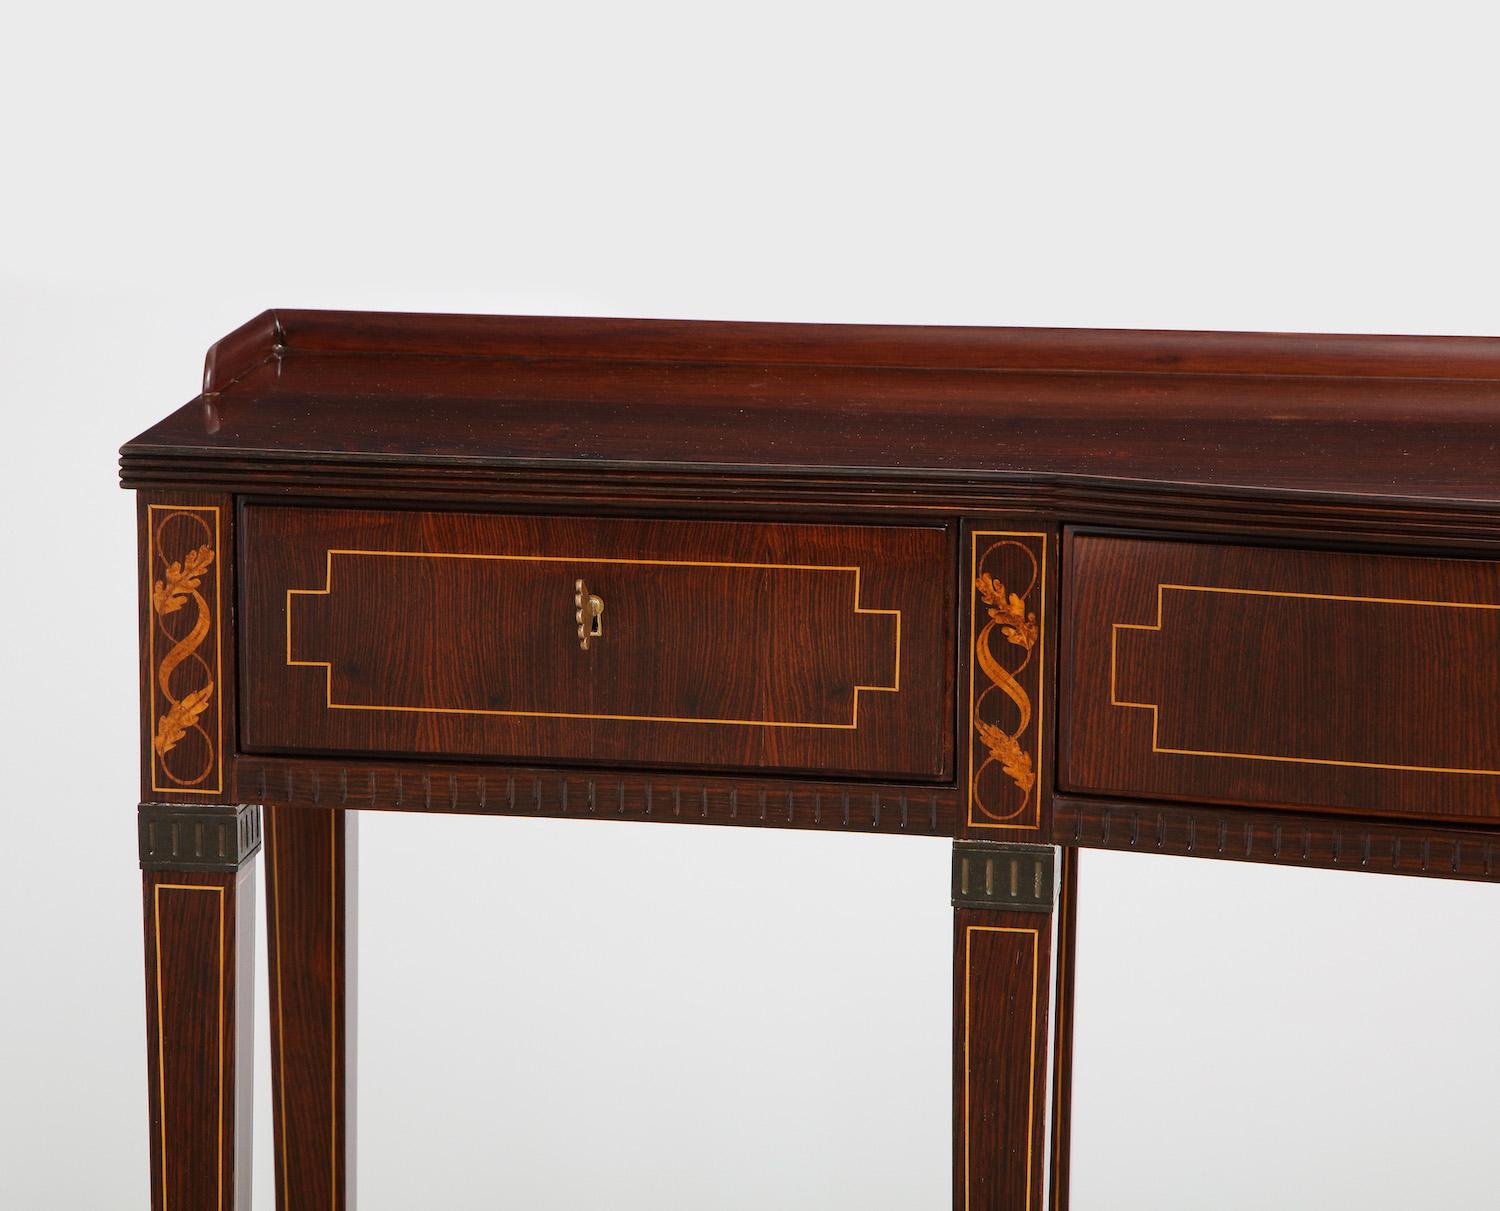 8-legged console table by Paolo Buffa. Rosewood, maple, burled maple, walnut, brass. Elegant console table with 3 drawers, foliage inlays and brass feet and mounts. Each drawer opens with a stylized brass key with a design that is typical of Paolo